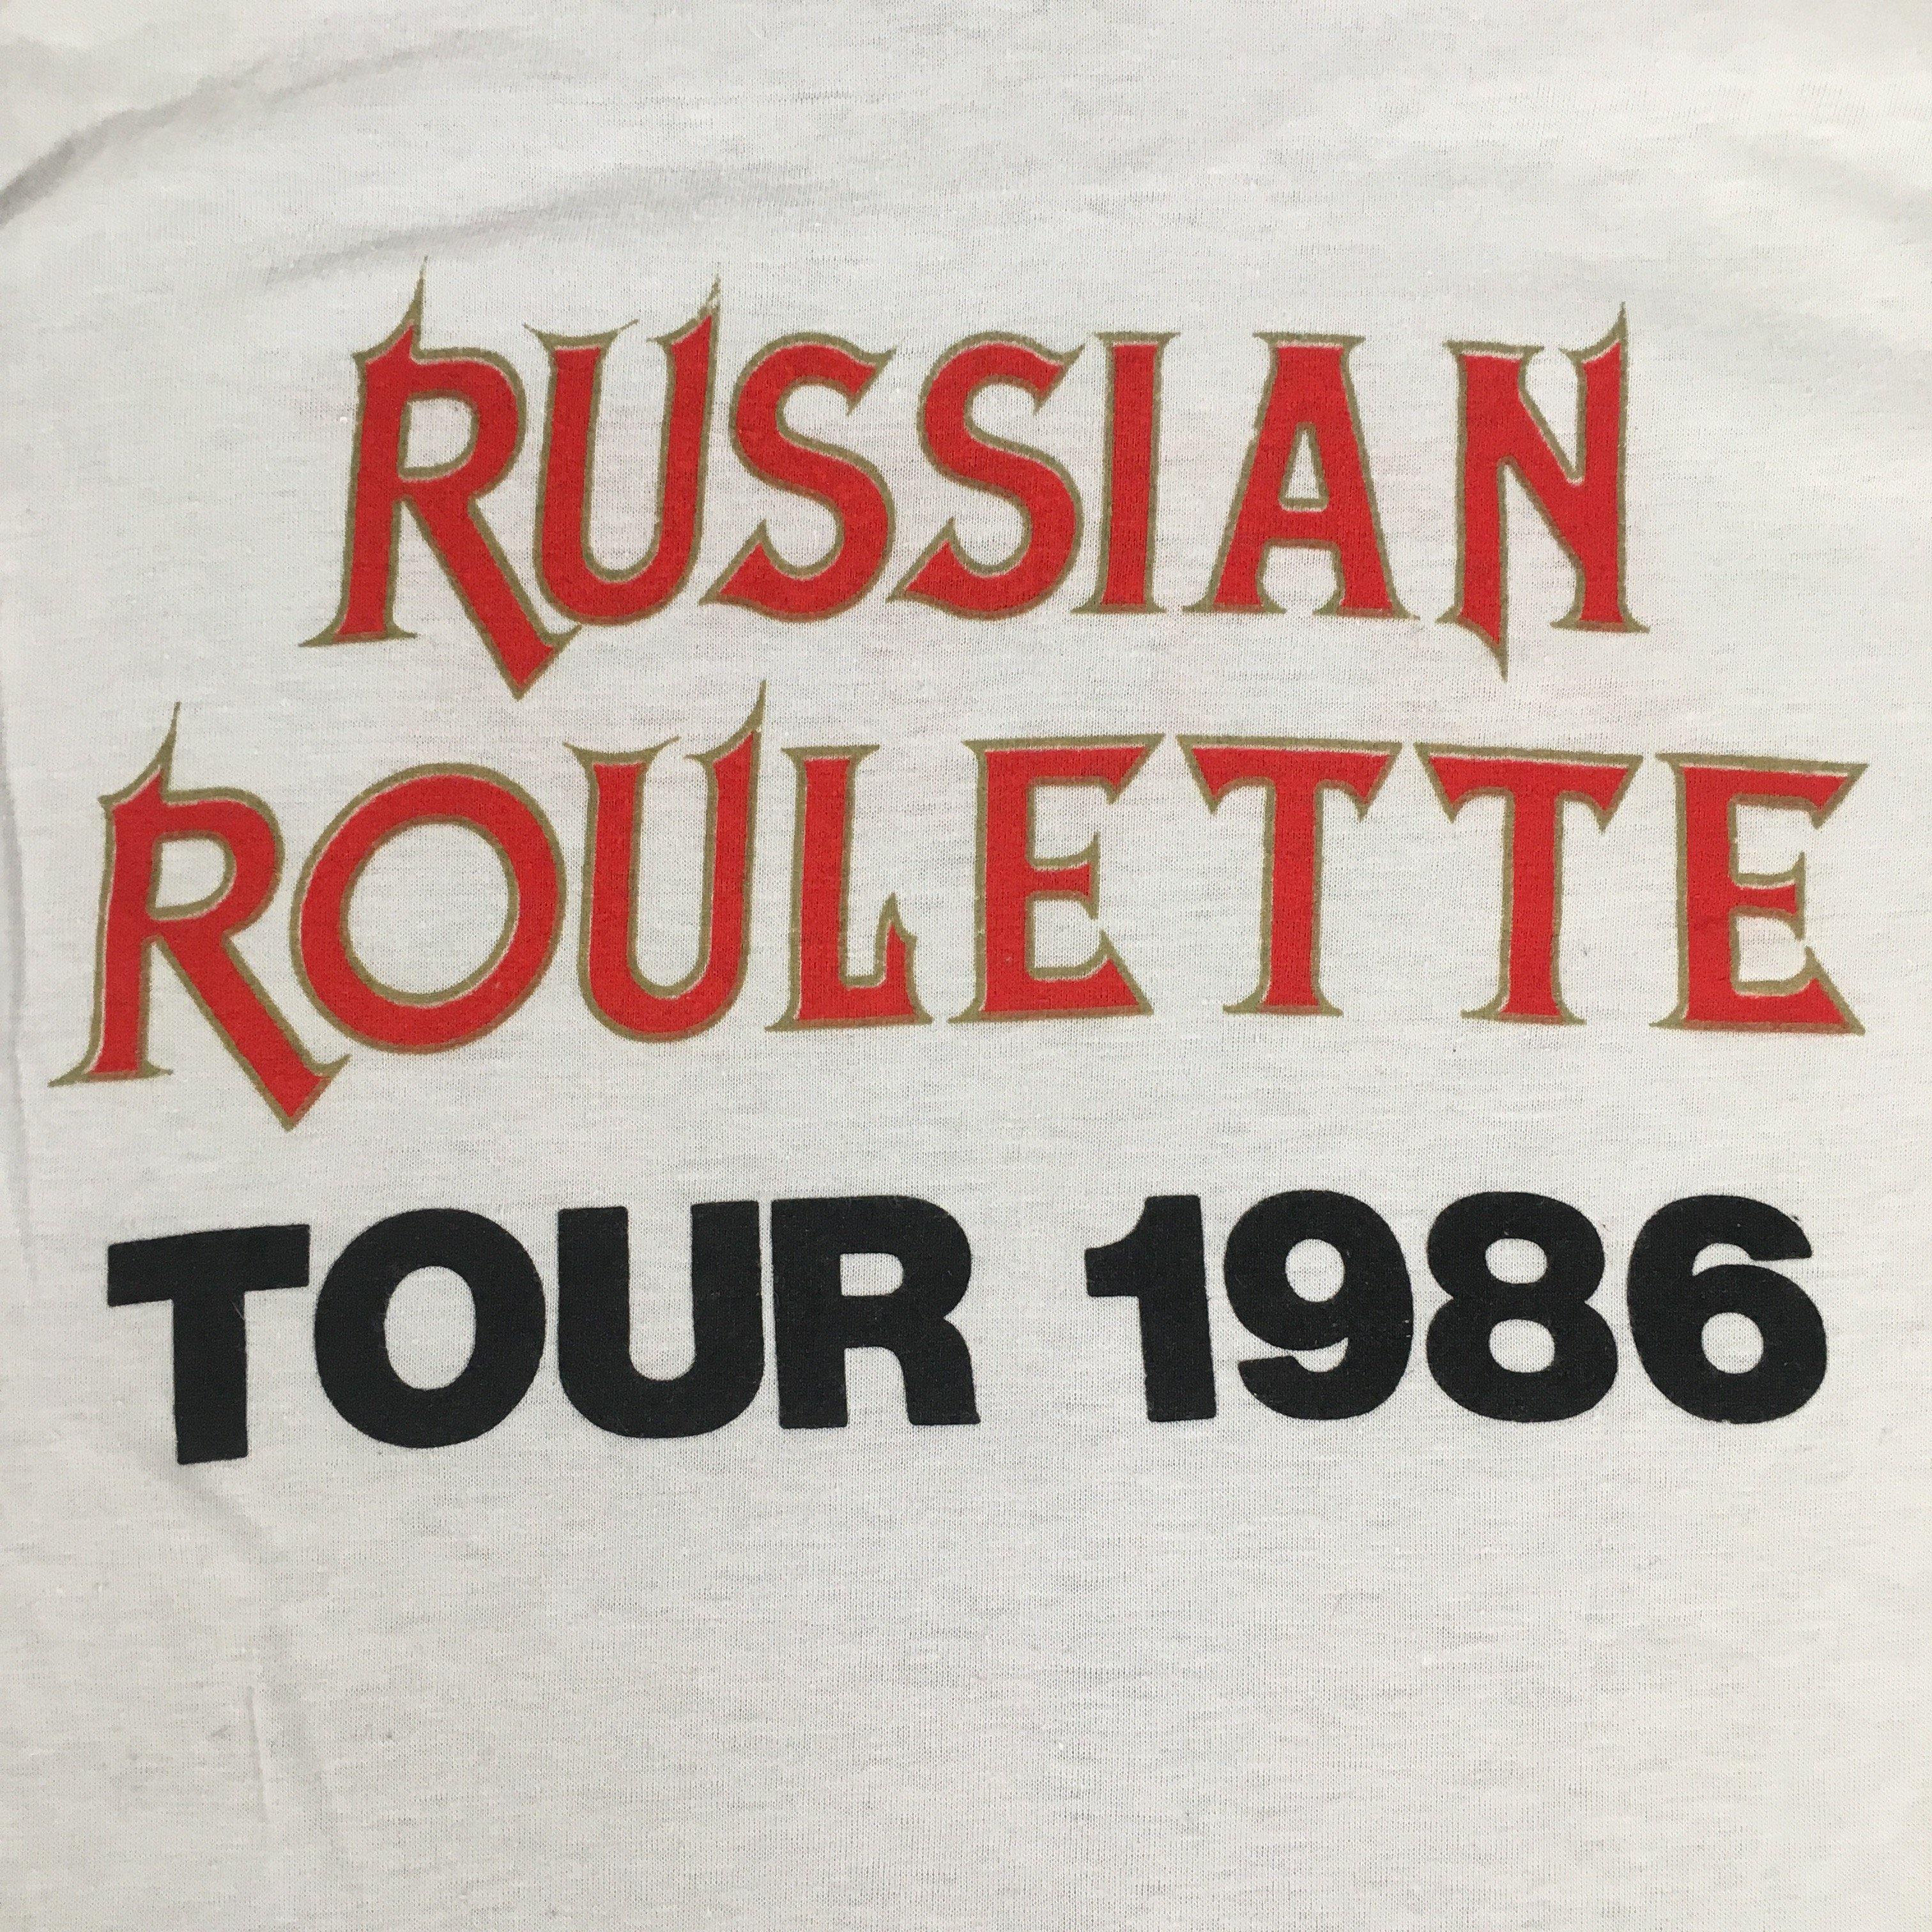 Buy The Lords of the New Church Russian Roulette Vintage Tee